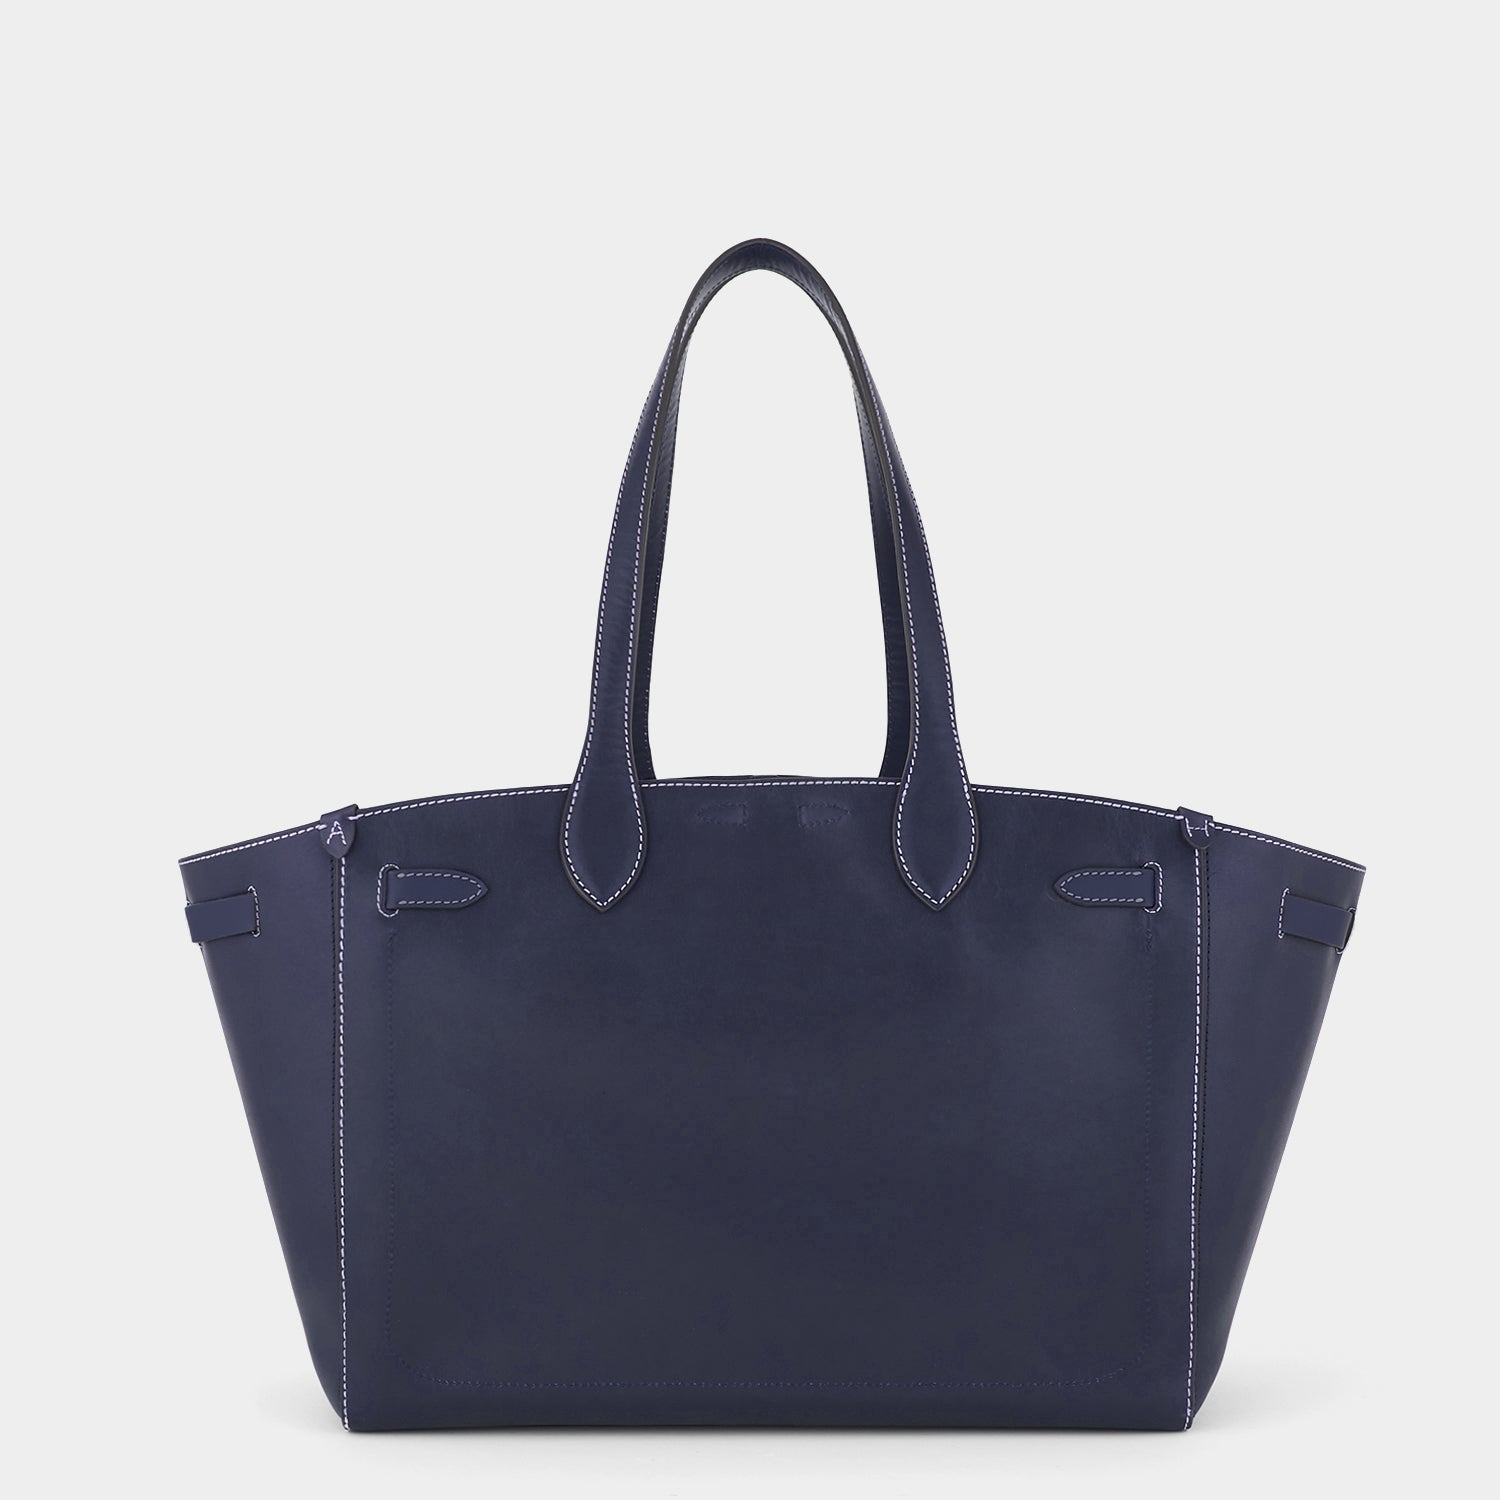 Return to Nature Tote -

                  
                    Compostable Leather in Marine -
                  

                  Anya Hindmarch US
